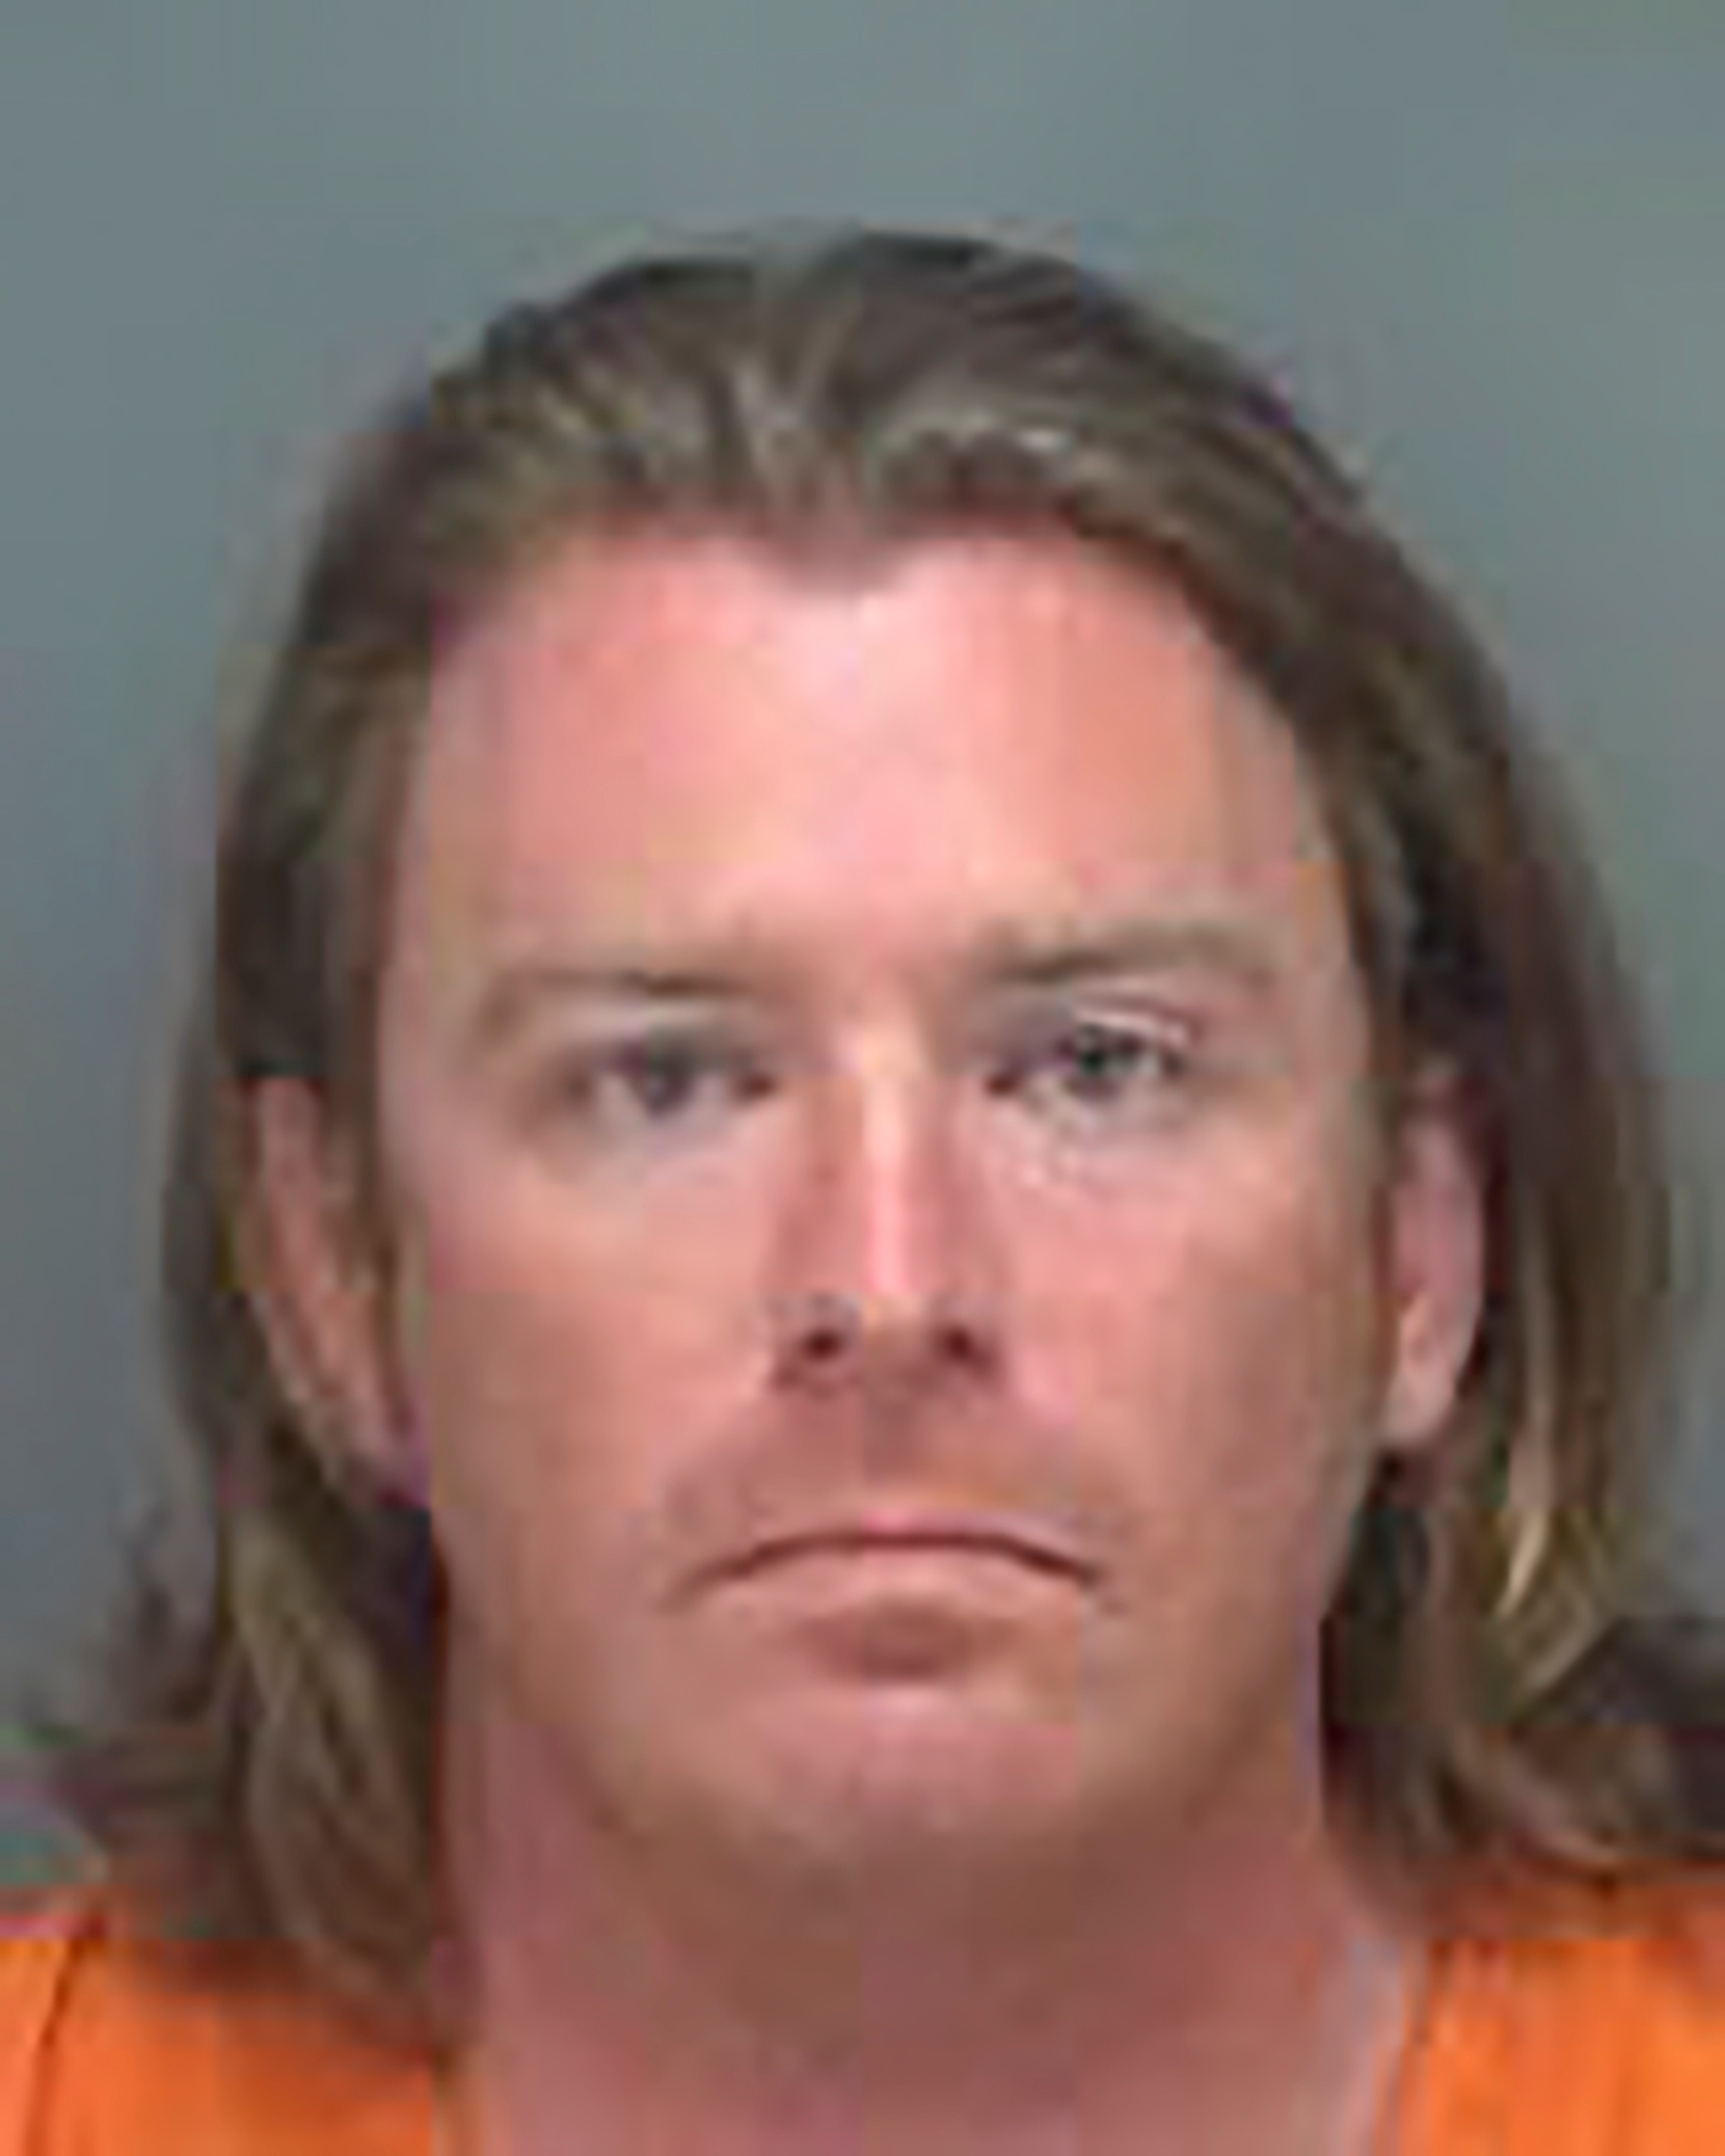 Adam Christian Johnson, who was arrested on a federal warrant, poses in a Pinellas County jail booking photograph